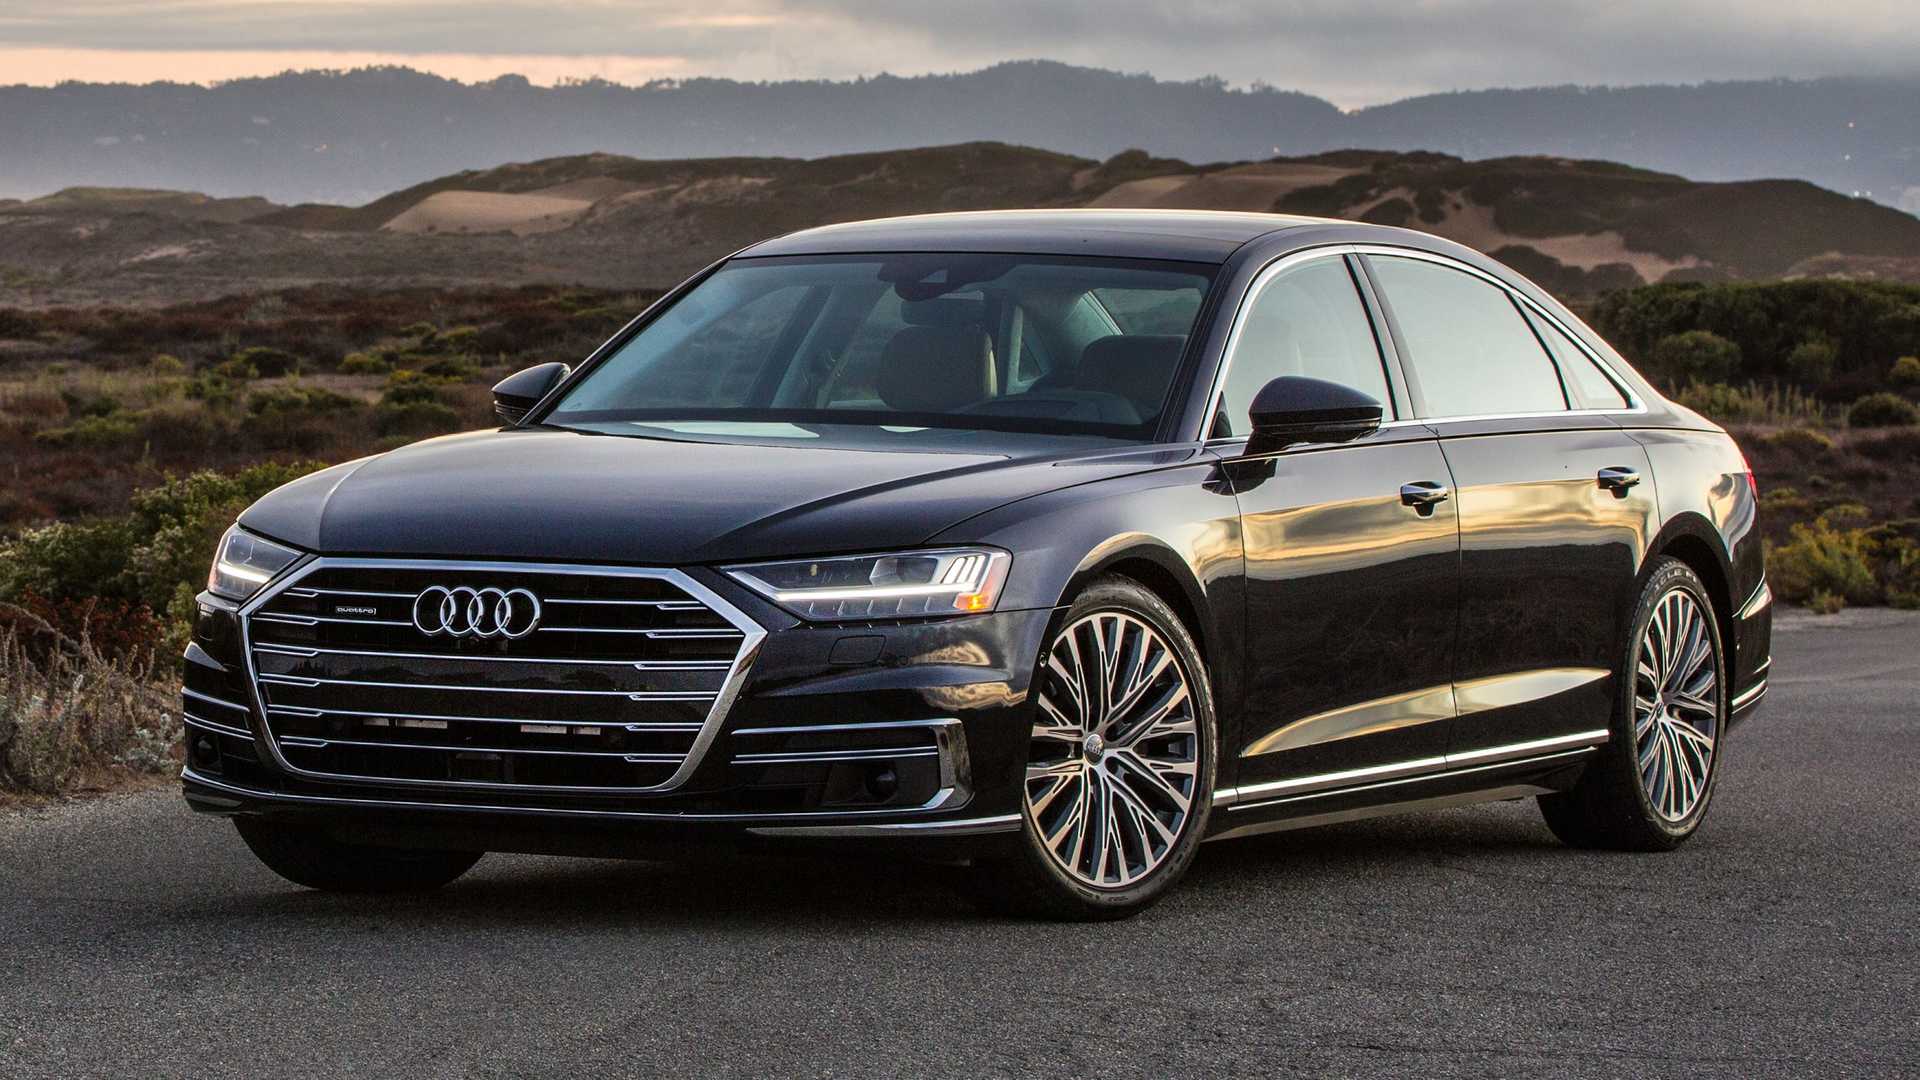 Audi A8 L News and Reviews